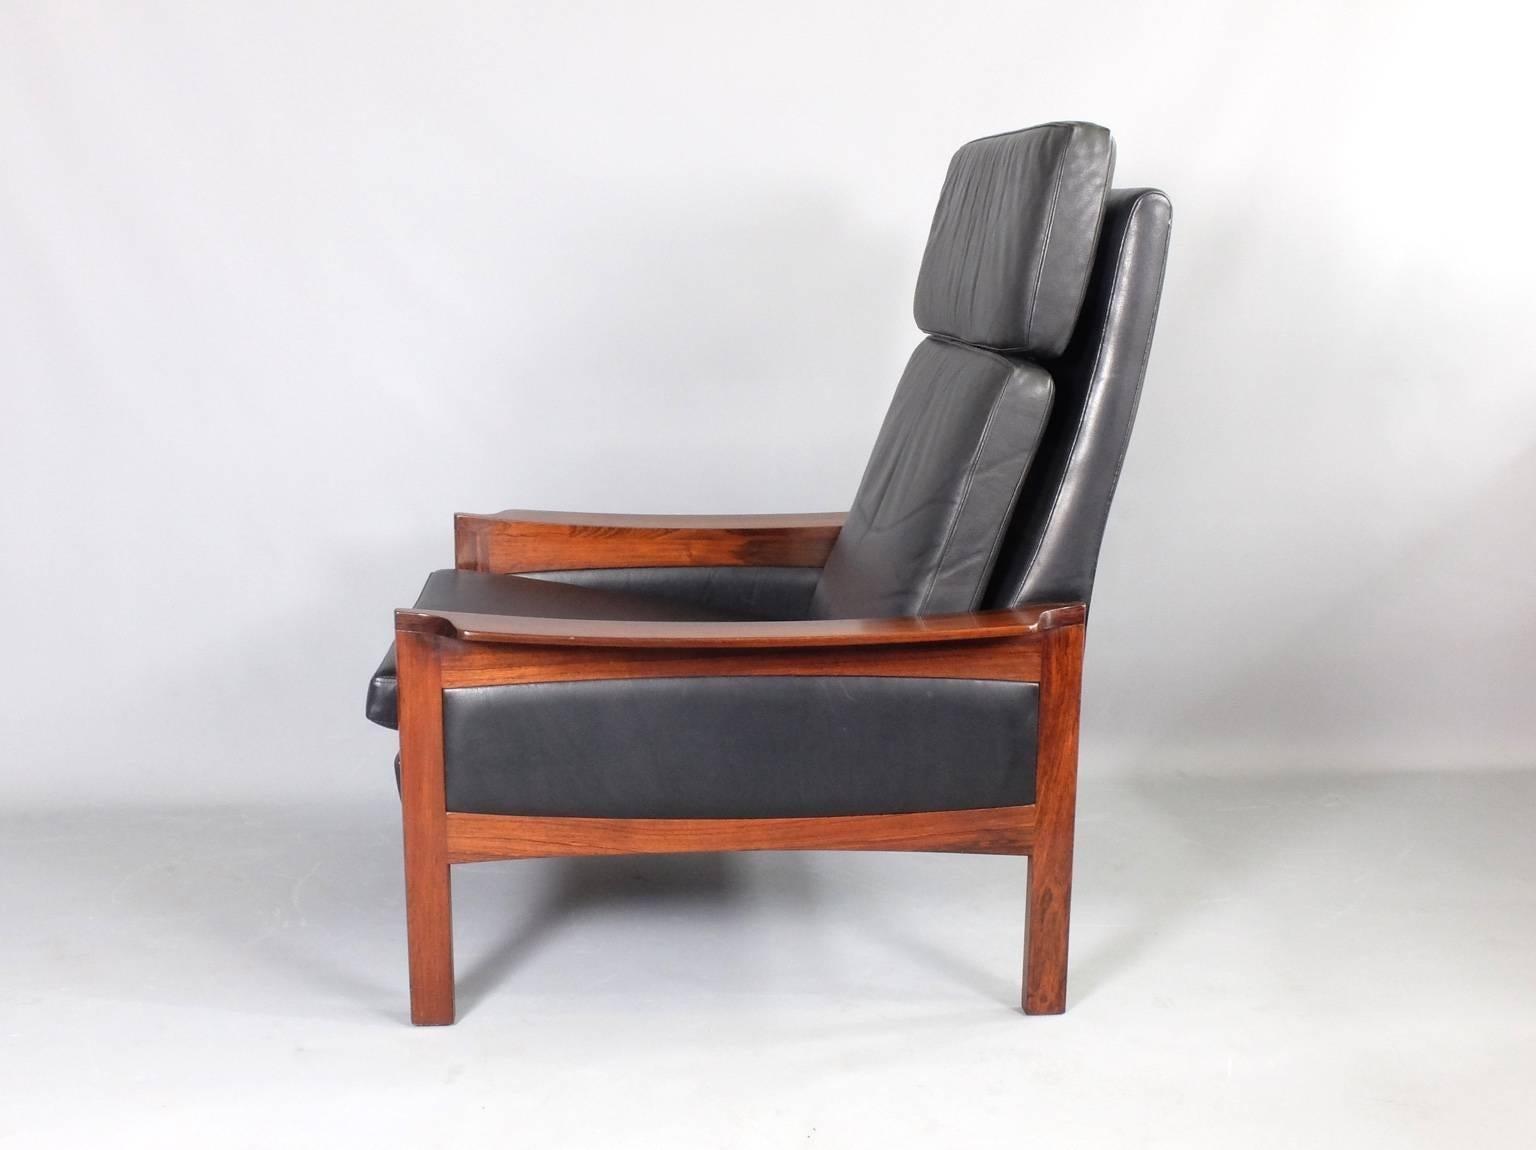 1960s Danish armchair with beautifully figured hardwood and black leather upholstery. A large, high back, comfortable lounge chair. The hardwood frame has been refurbished to bring out the full beauty of the timber. All the cushions have new